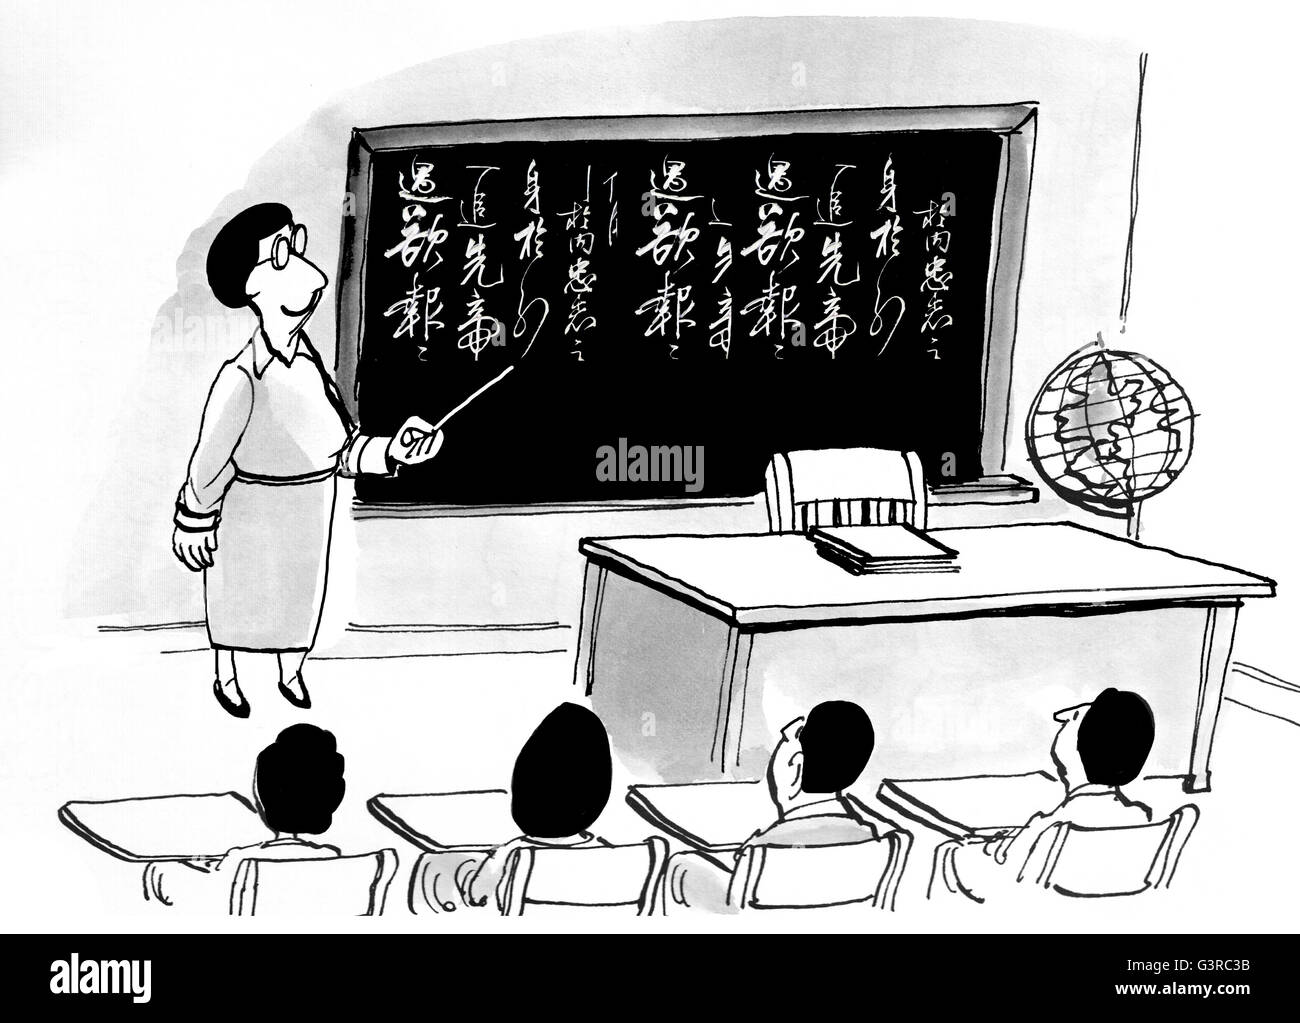 Illustration about learning Chinese. Stock Photo